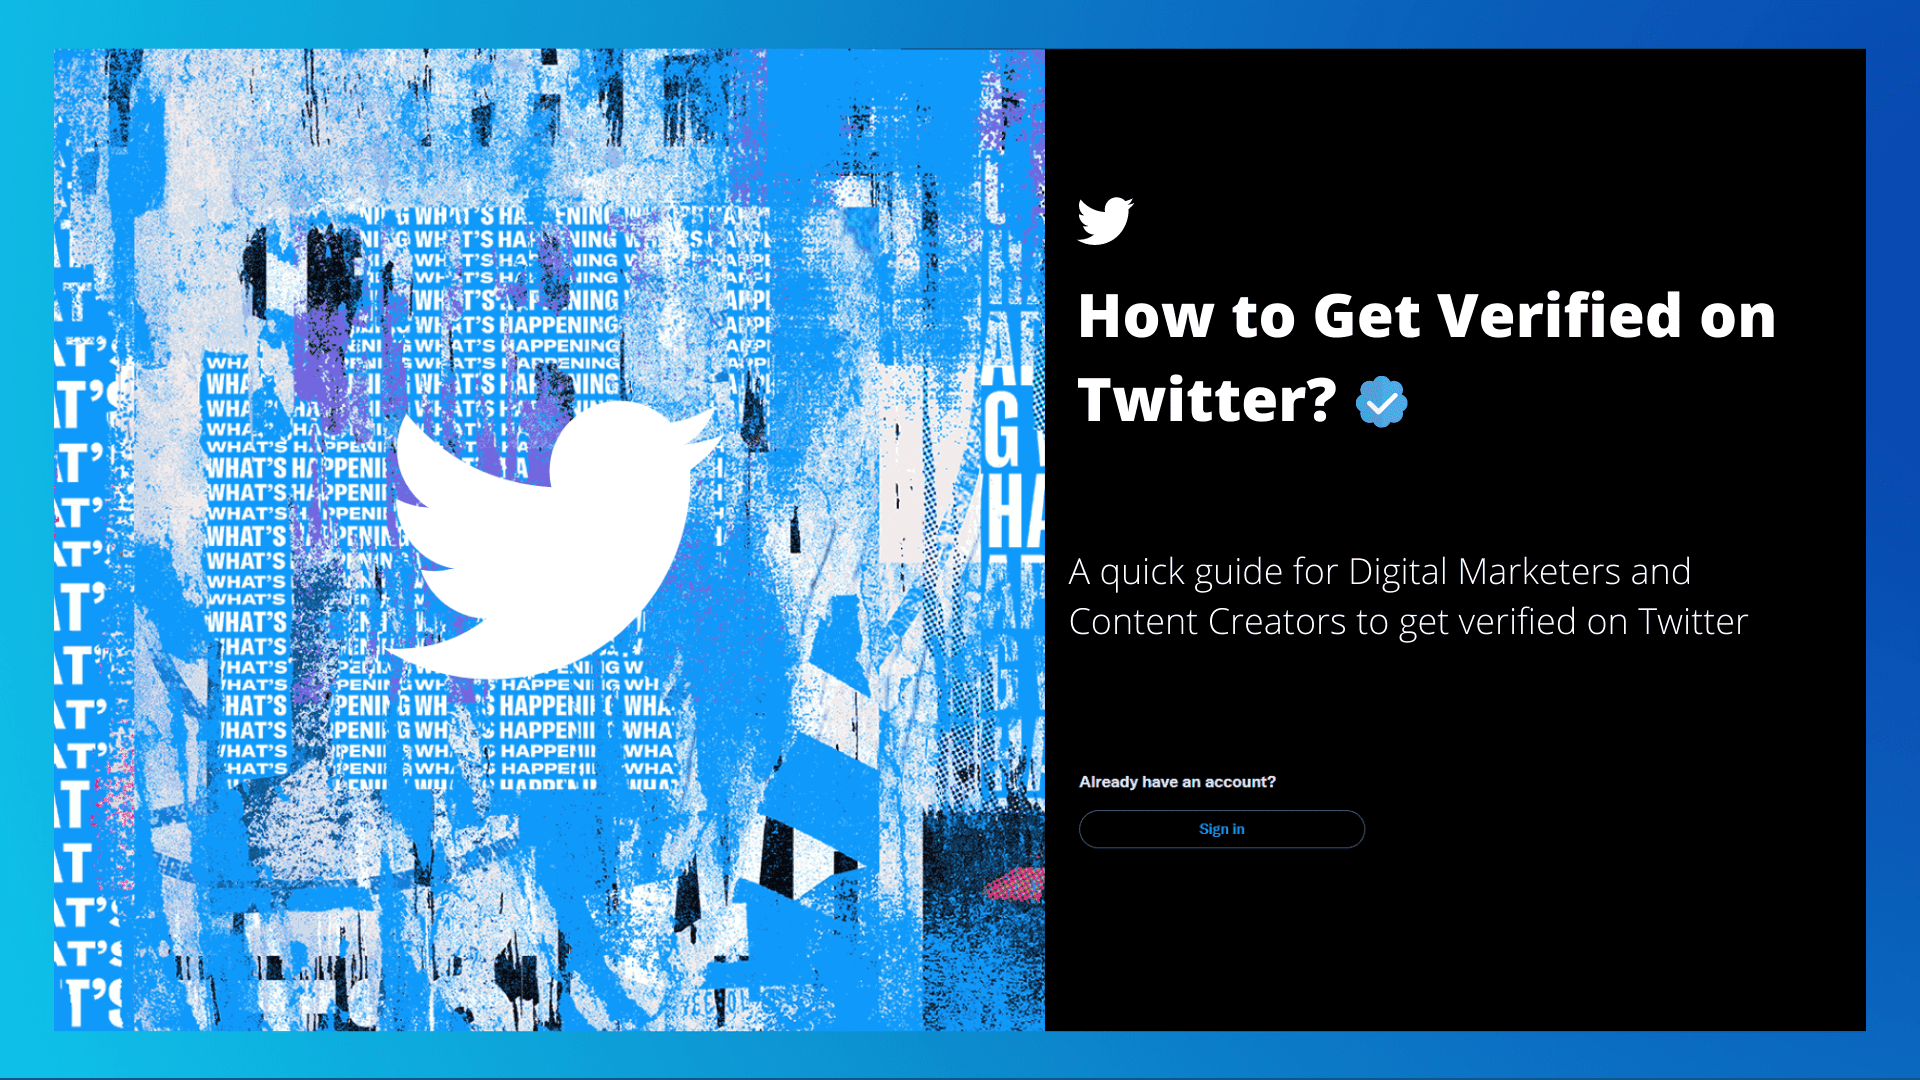 Twitter logo illustration on the left with the title: "How to Get Verified on Twitter?"